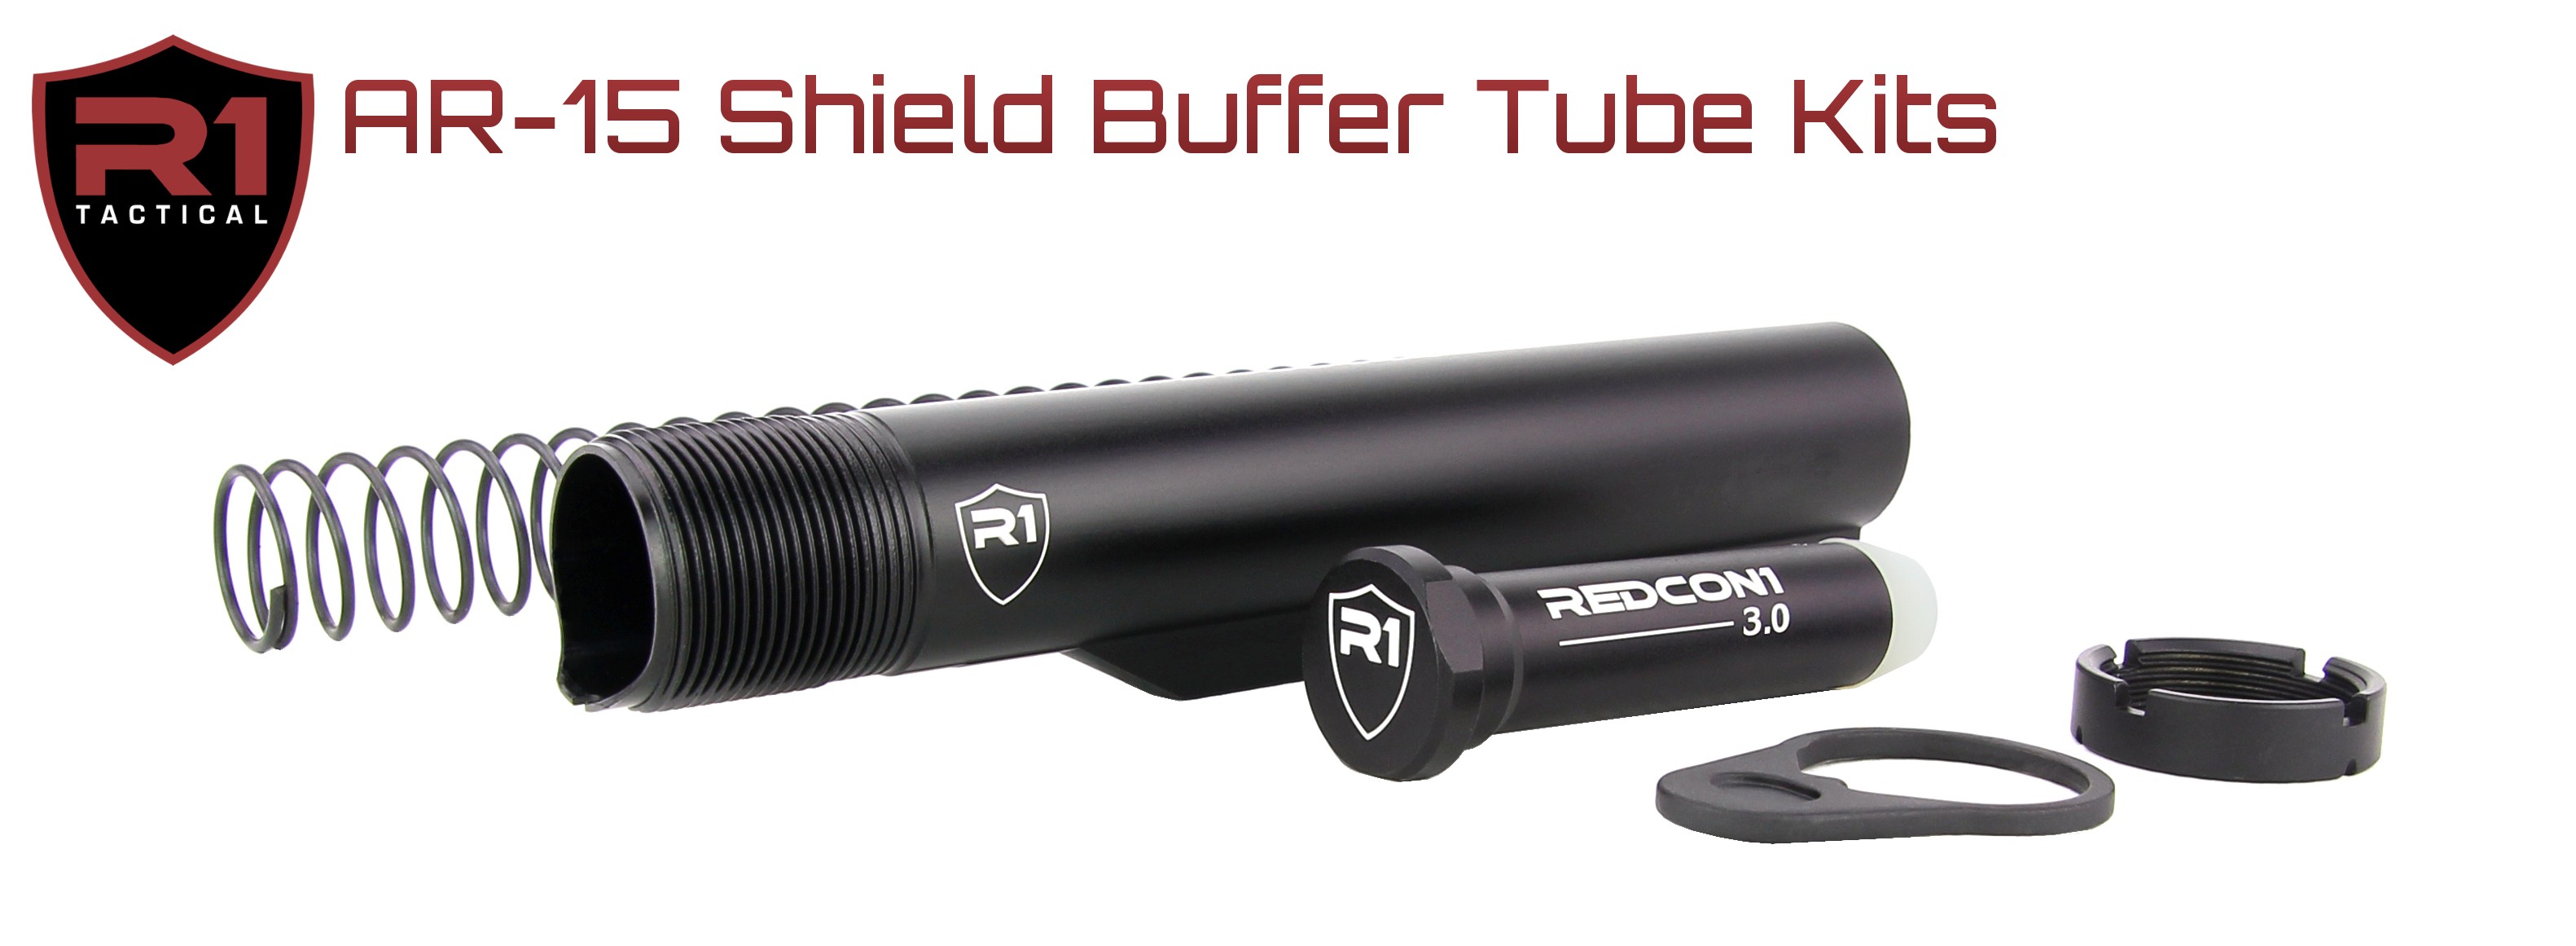 R1 Tactical AR-15 Shield Buffer Tube Kit Mil-Spec - Black Anodized | Redcon1 Tactical